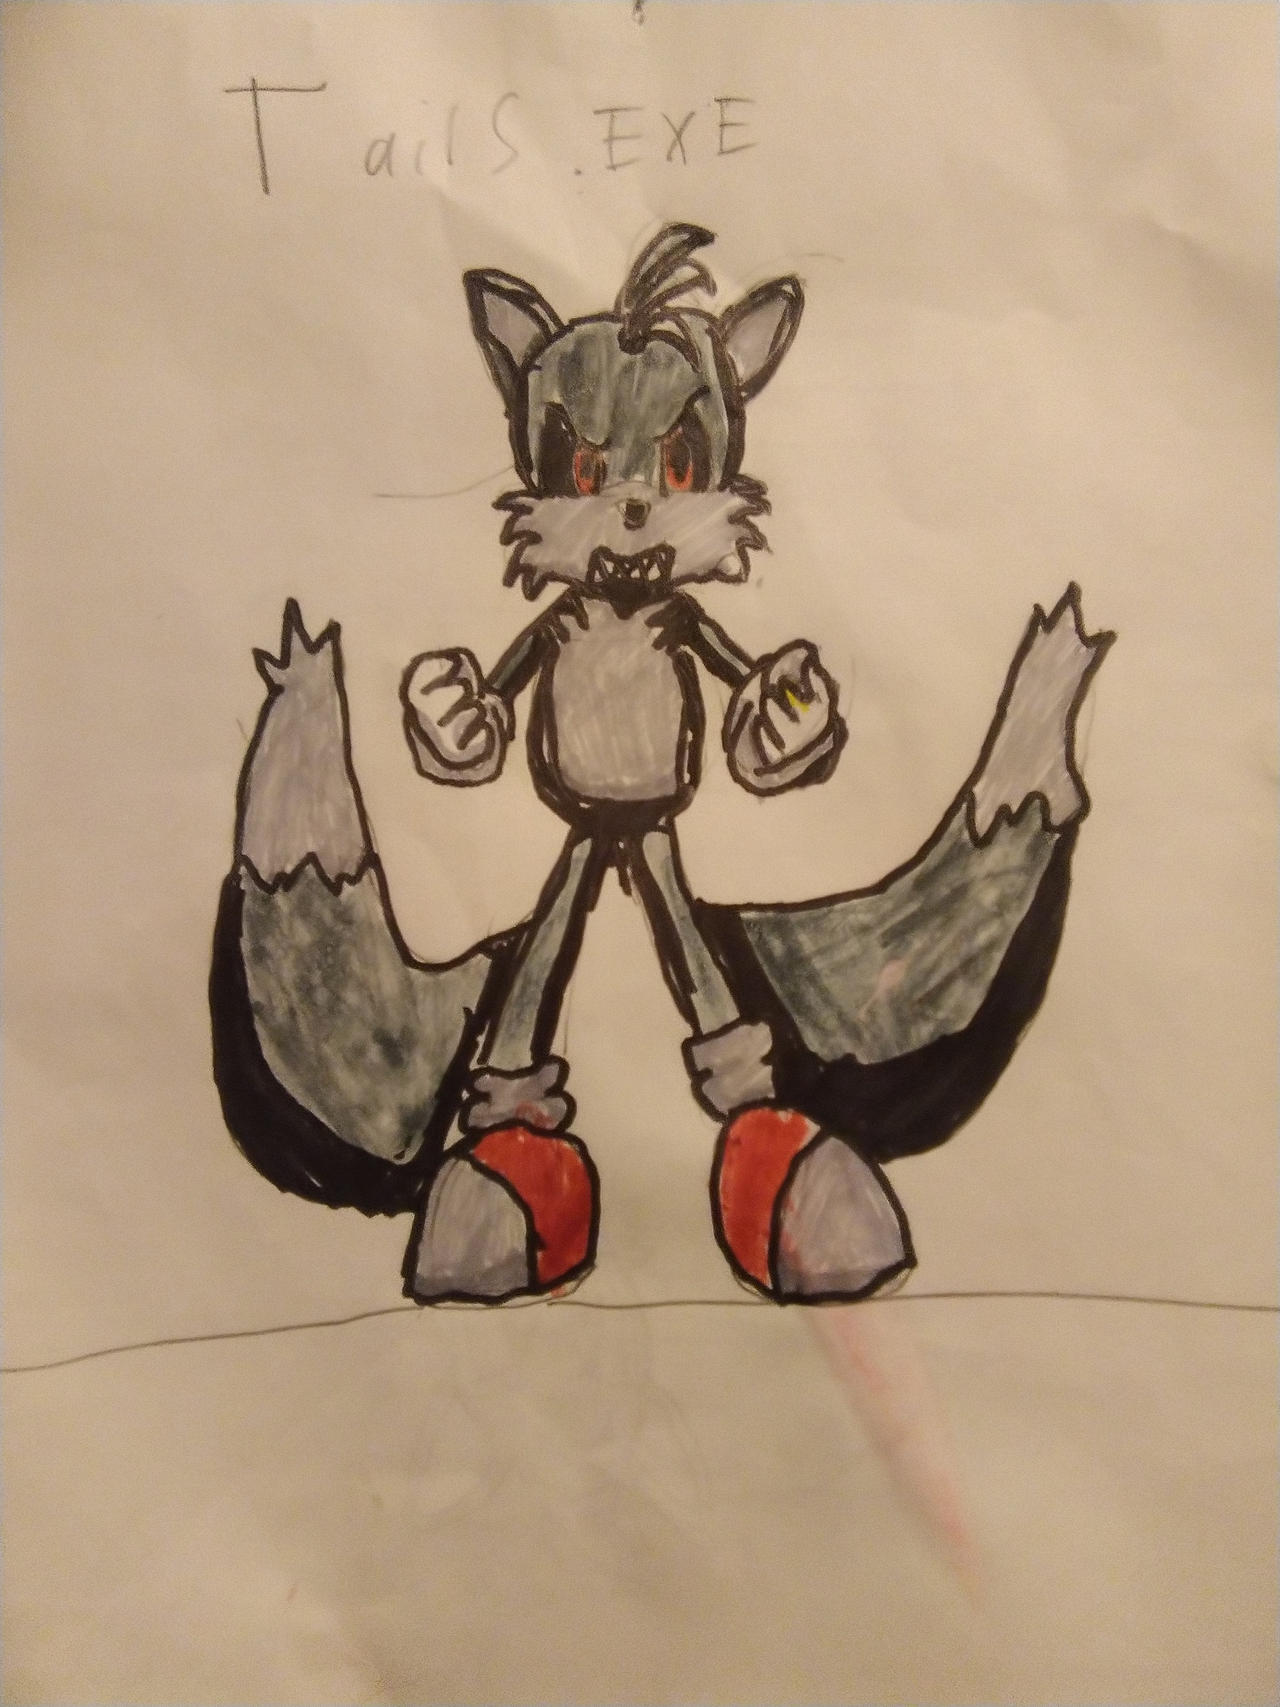 Tails.exe by luisletplay123 on DeviantArt